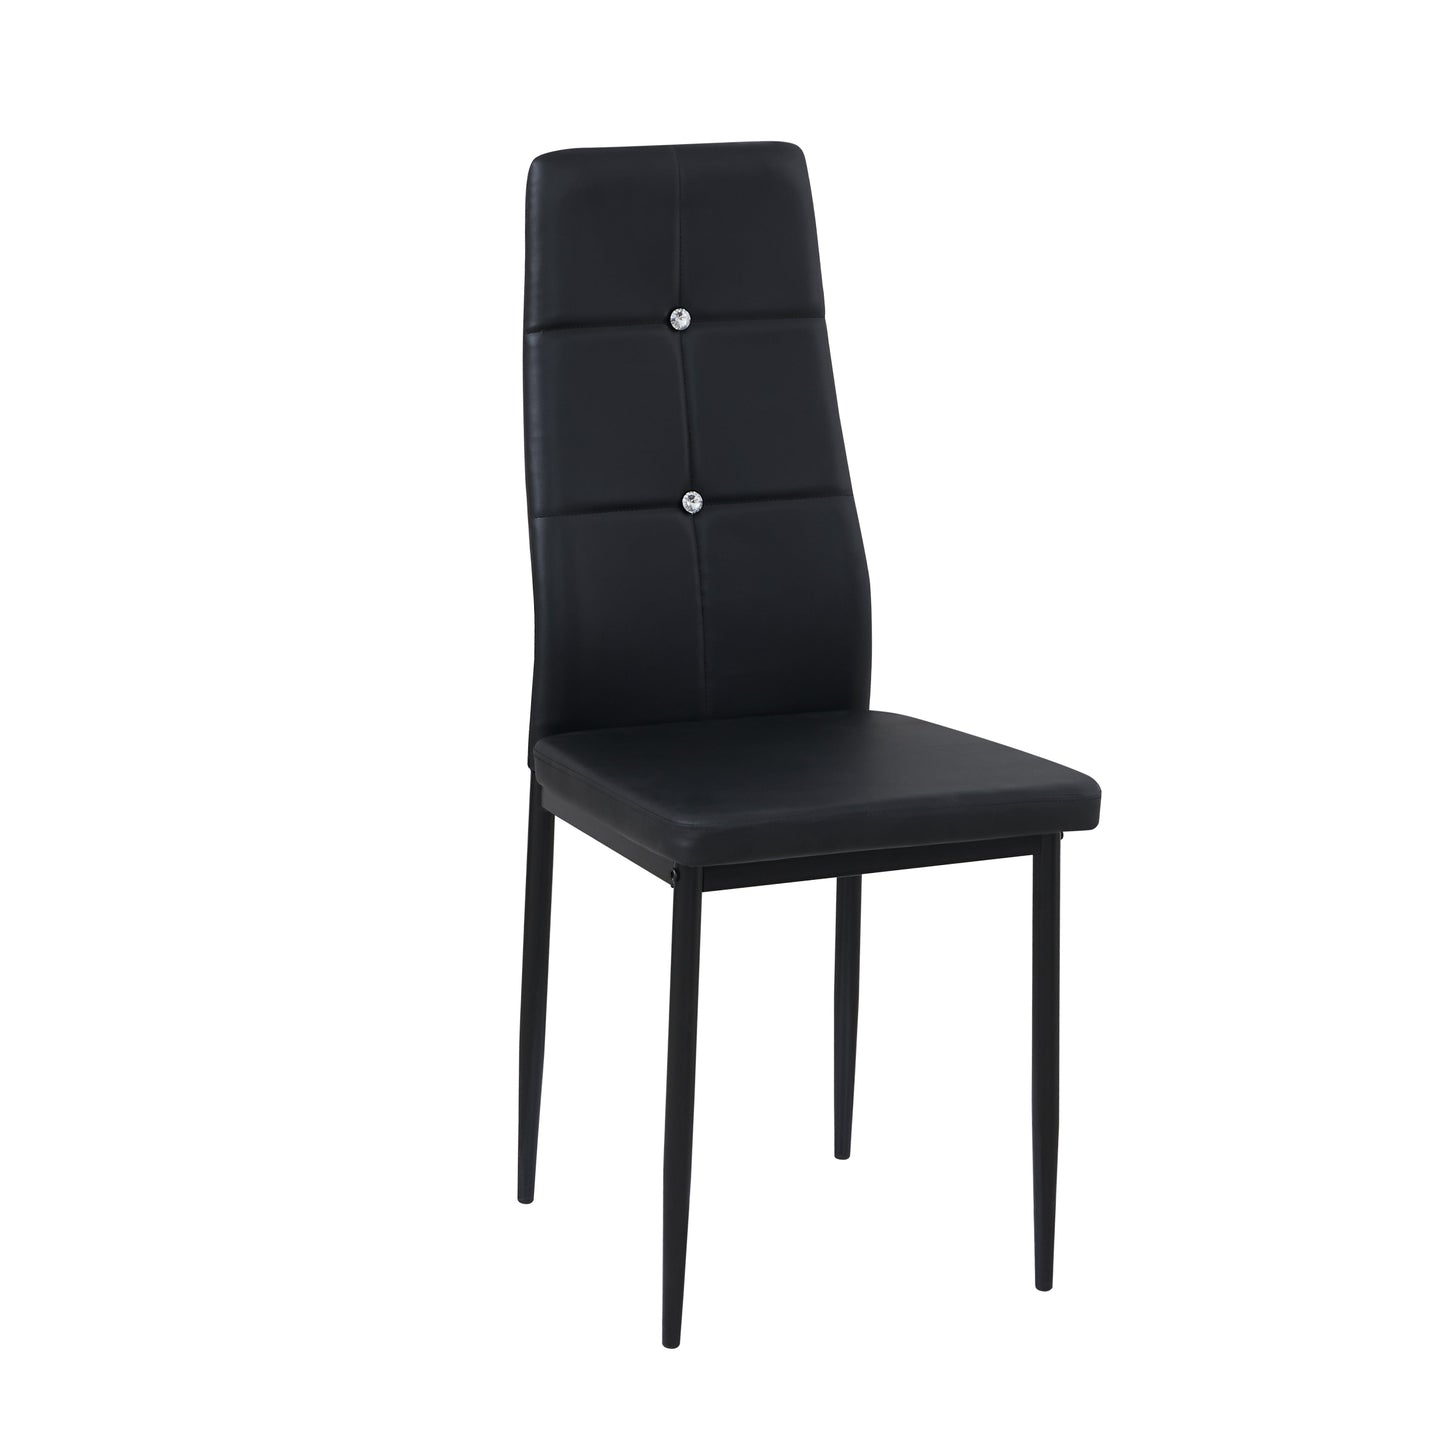 ANN-CIRCLE dining chair set chairs kitchen chair upholstered chair group of chairs - black/white